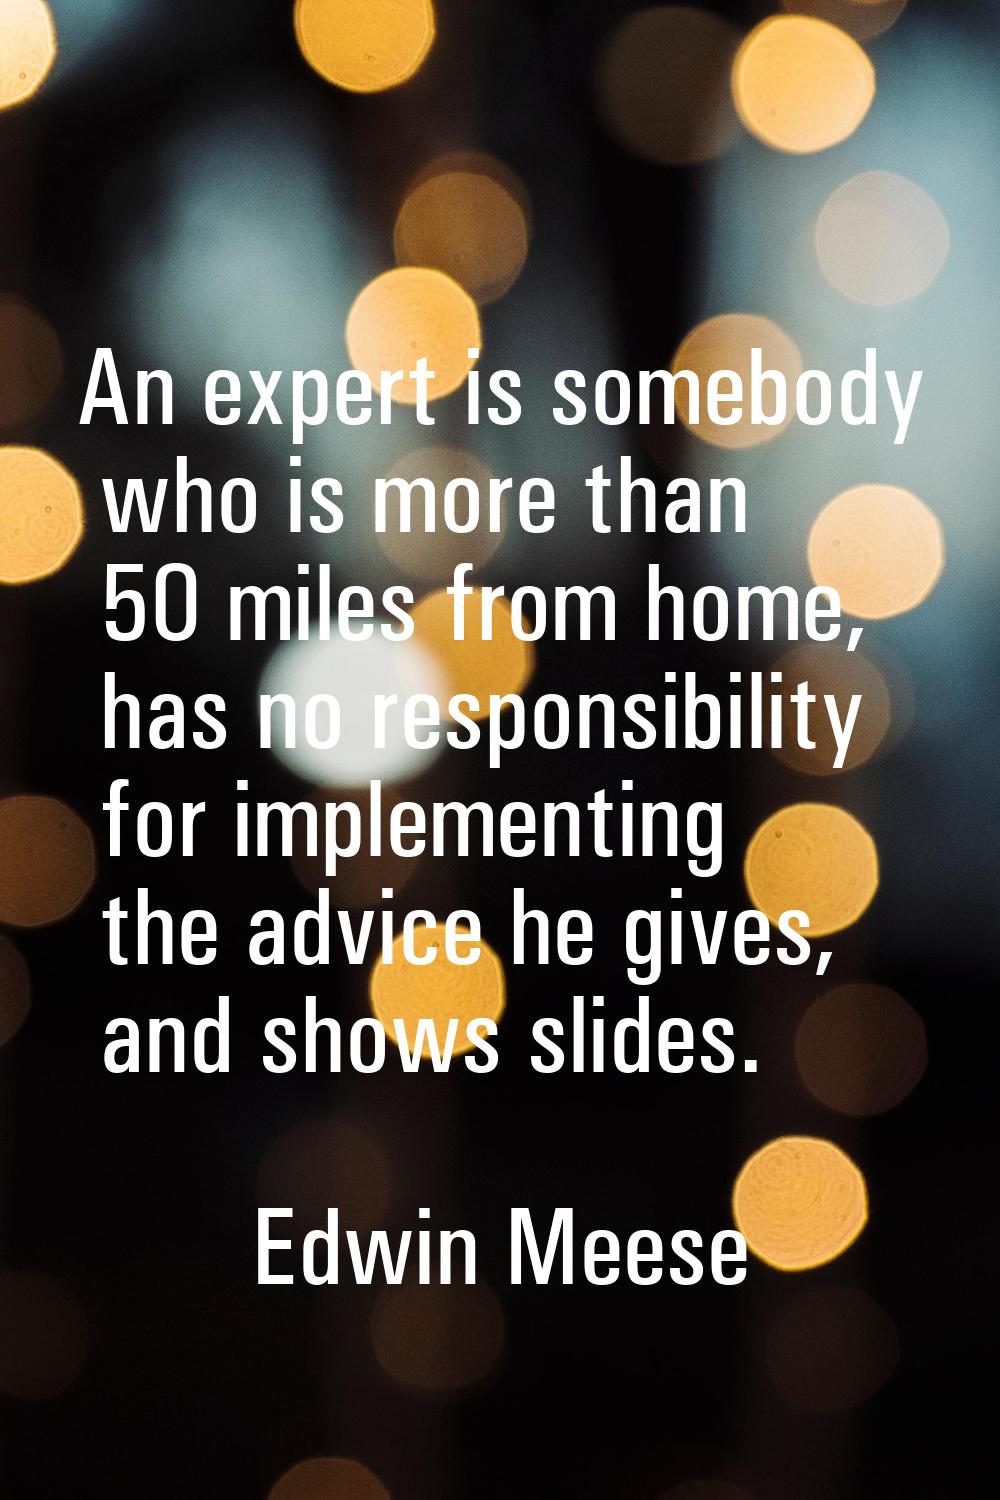 An expert is somebody who is more than 50 miles from home, has no responsibility for implementing t